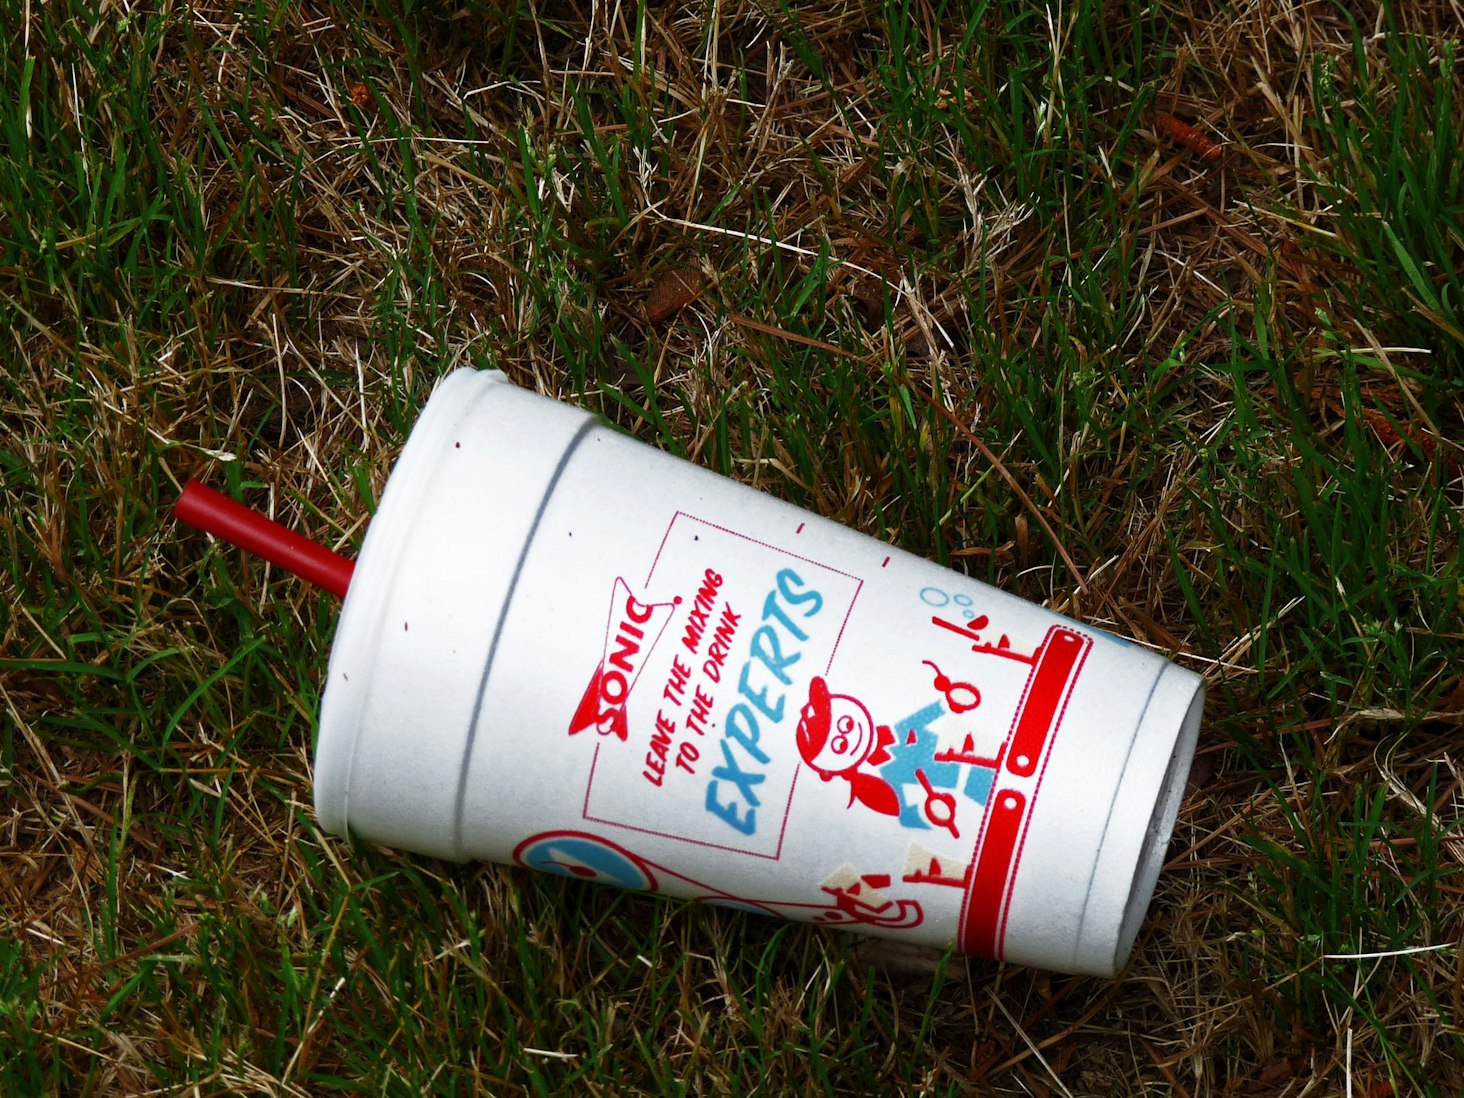 A polystyrene foam cup from the Sonic restaurant chain litters the ground